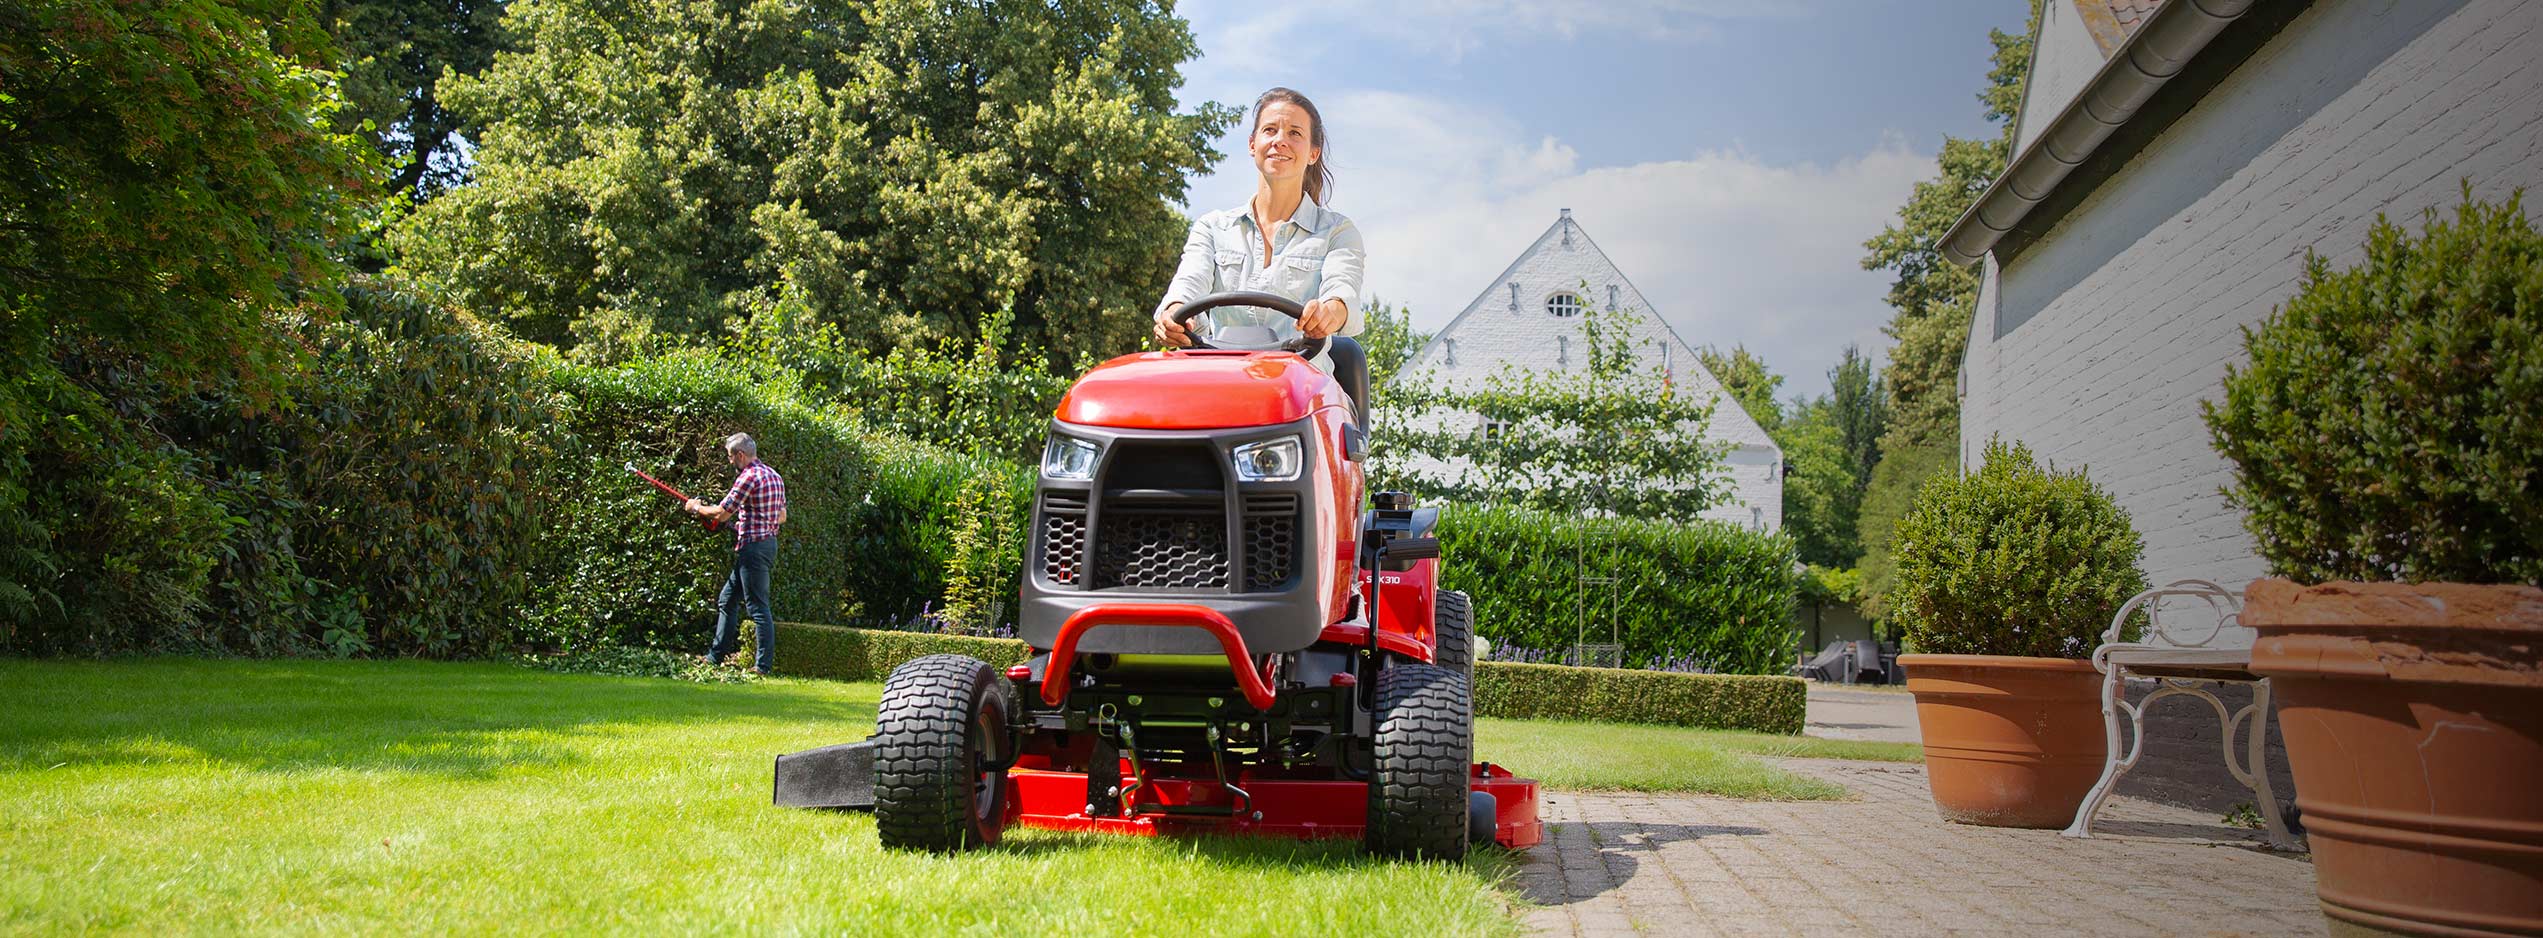 About Snapper Lawn Tractors